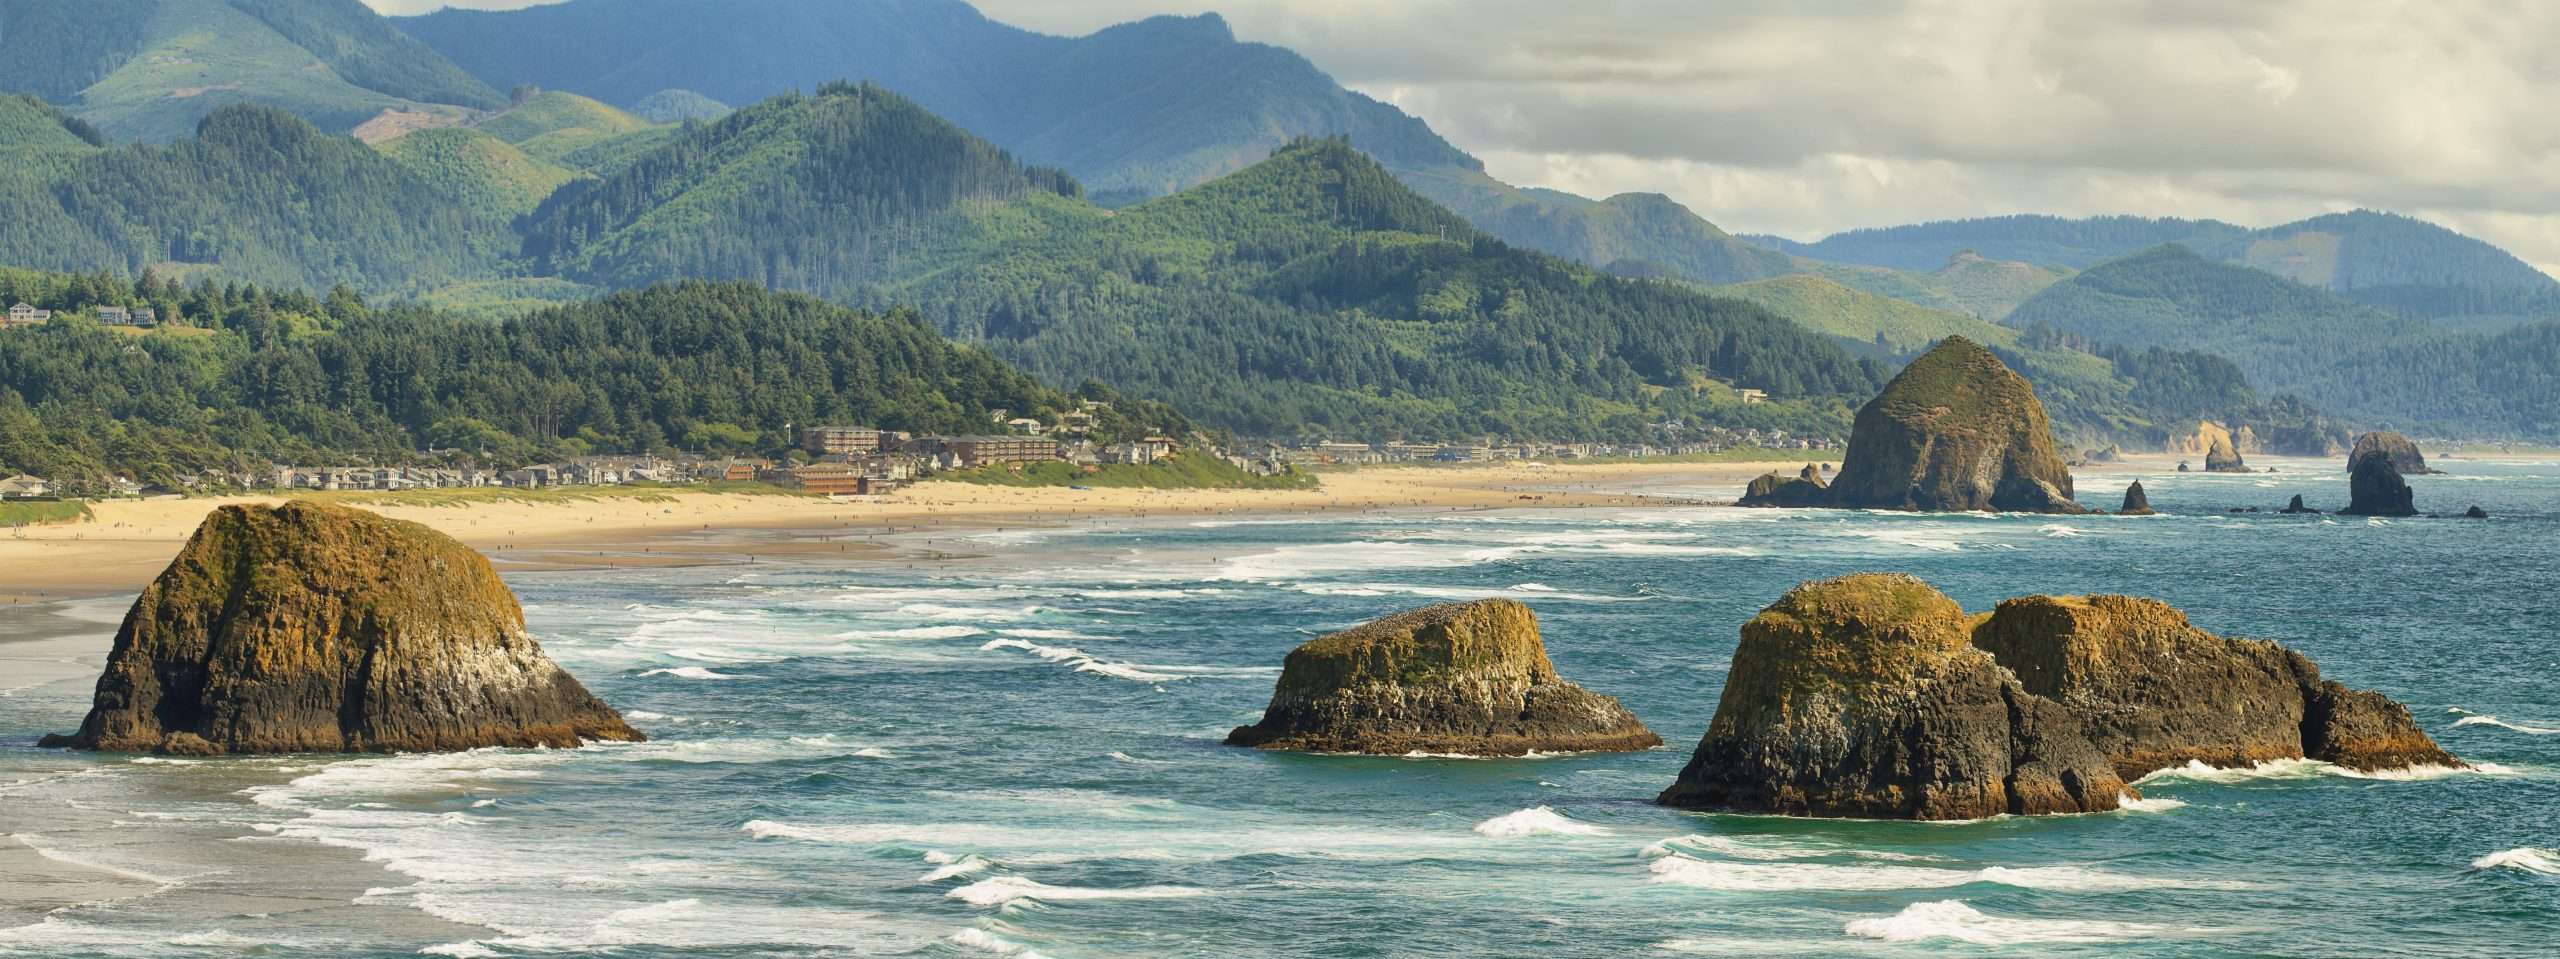 9 Best Oregon Coast RV Parks and Campgrounds You’ll Love